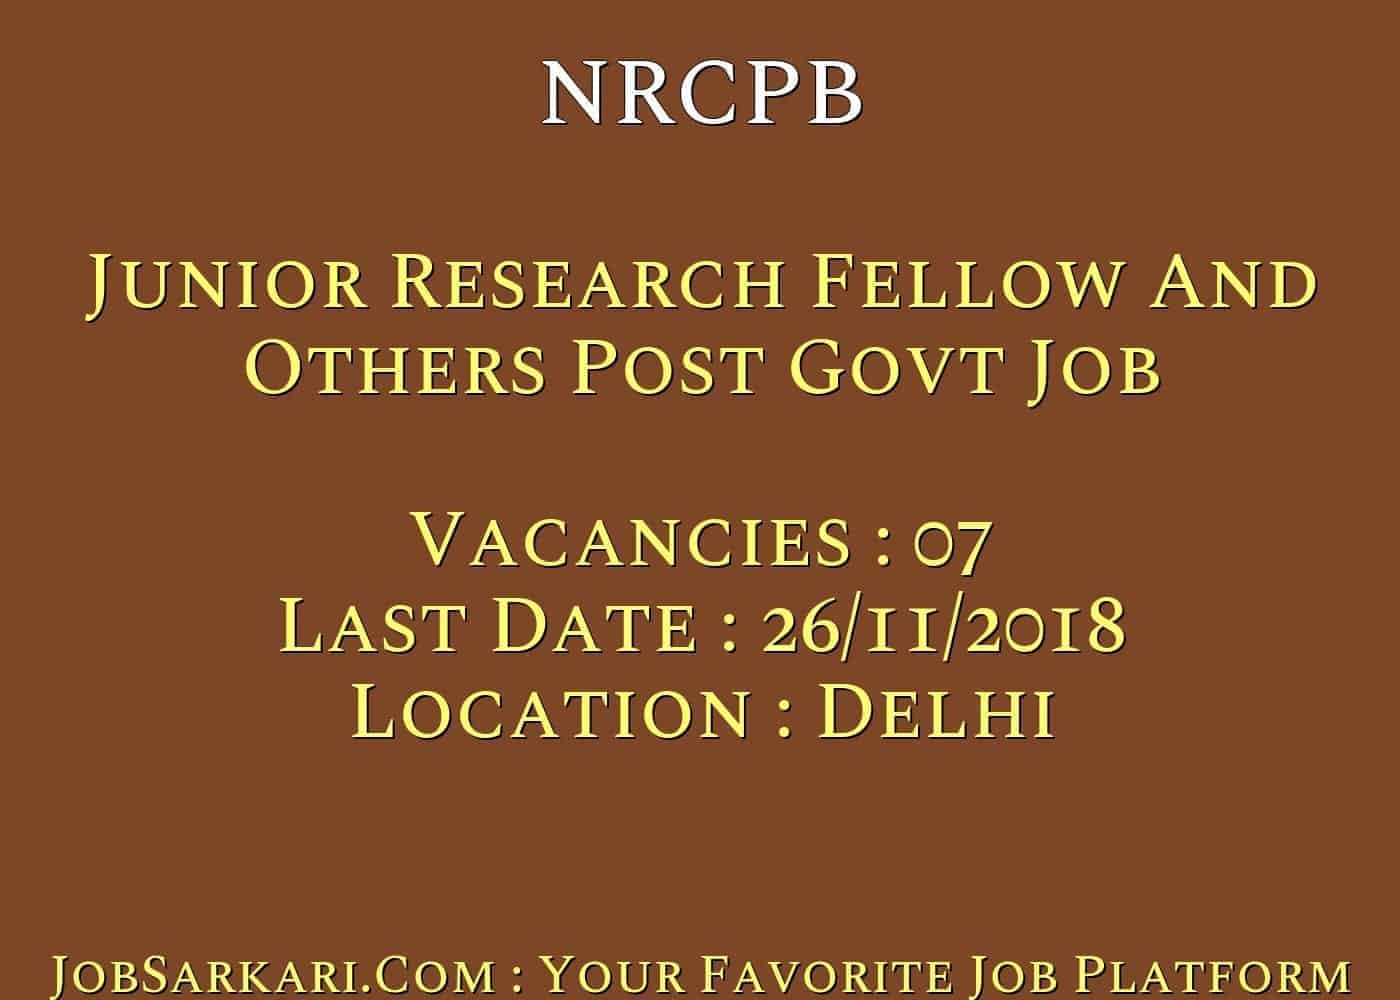 NRCPB Recruitment 2018 For Junior Research Fellow And Others Post Govt Job